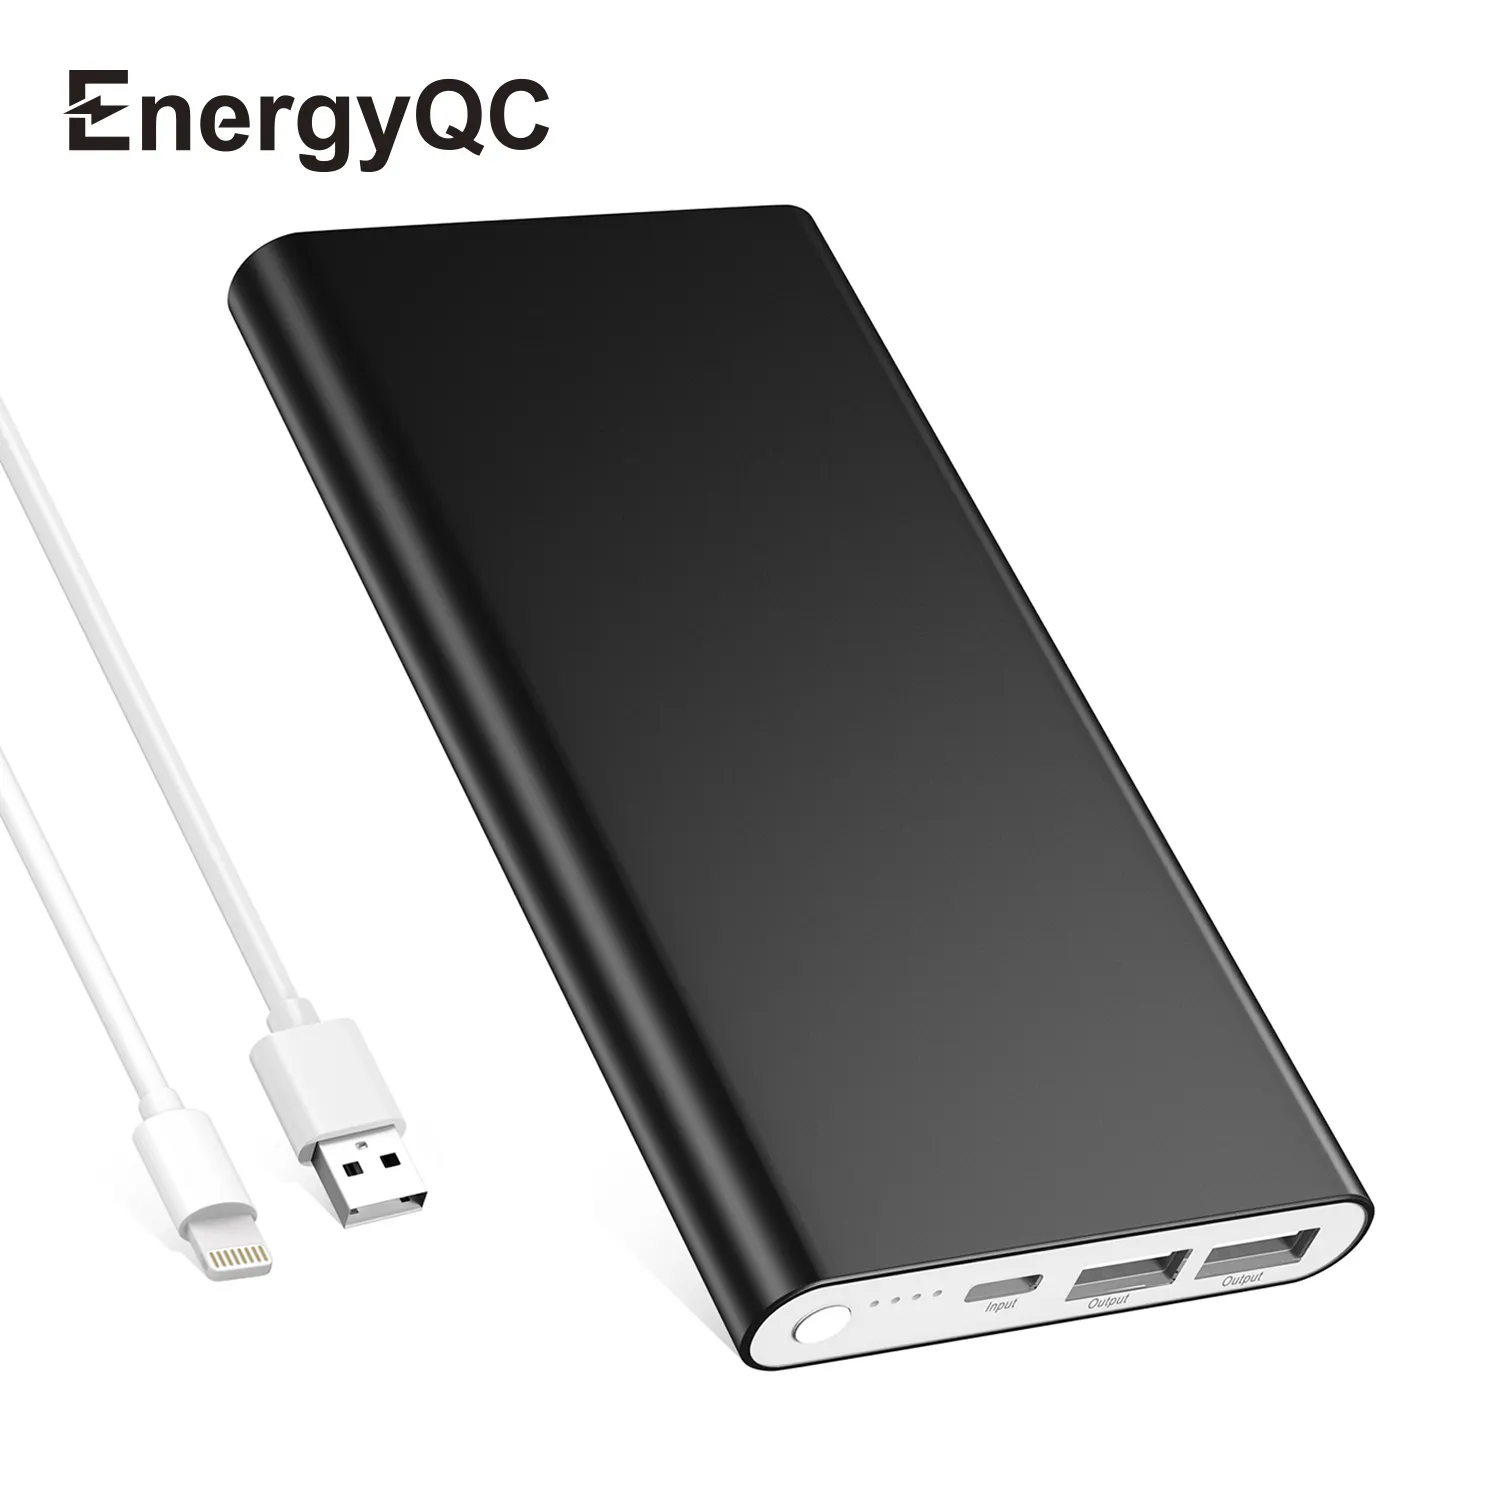 Super Slim Double USB Port Portable Phone Charger 12000 mAh Mobile Lithium Battery Power Bank For Travel